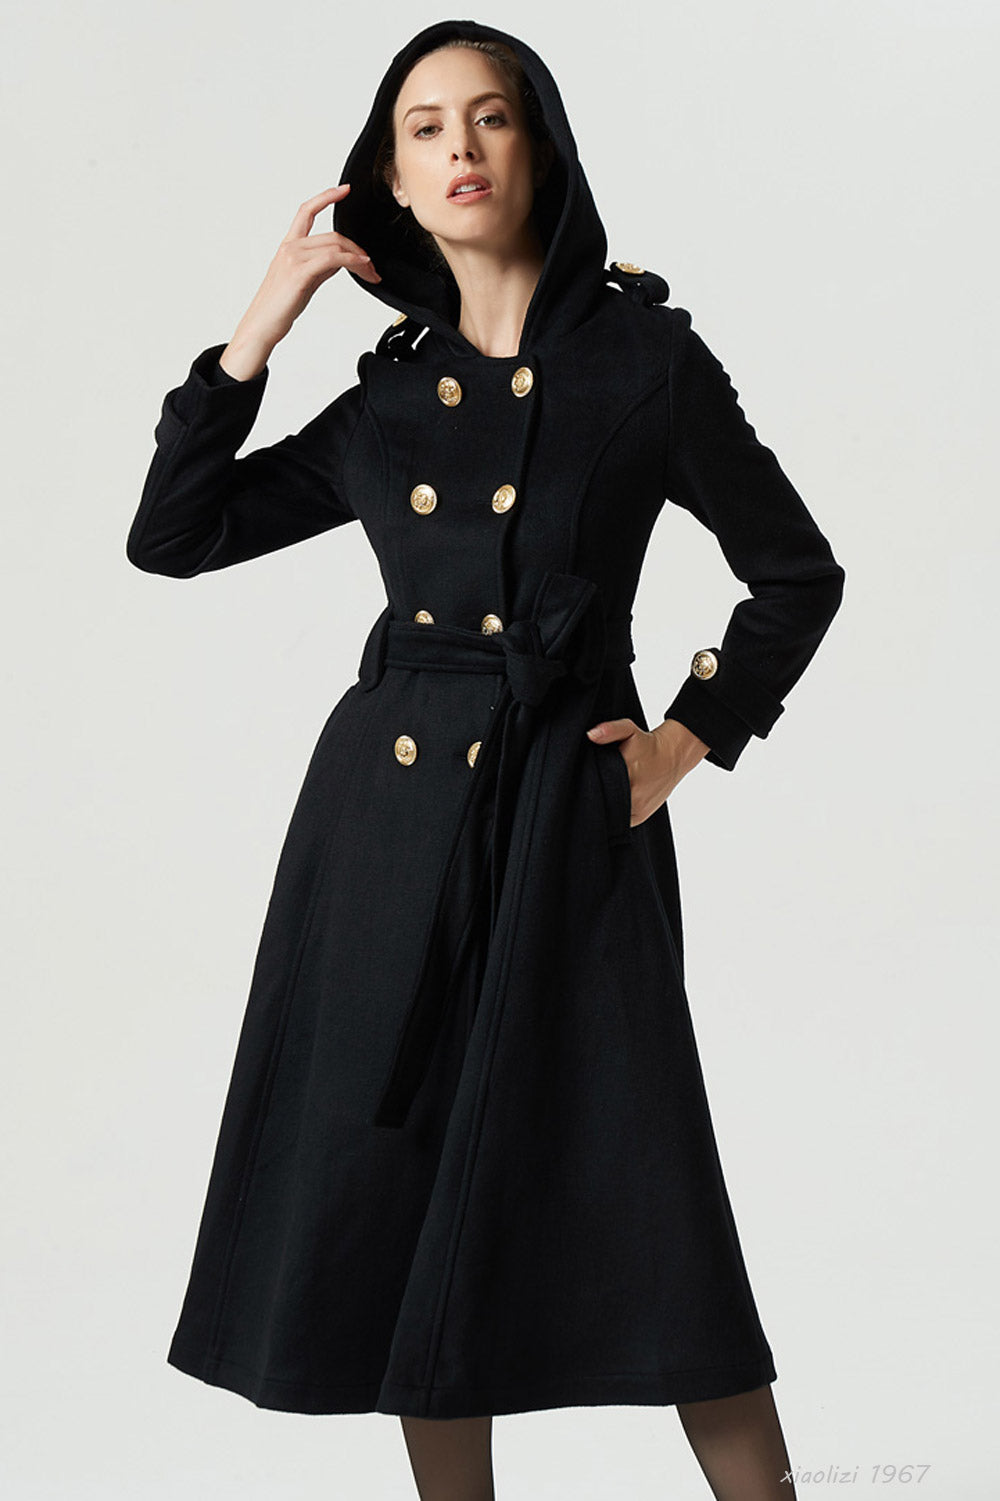 double breasted military wool coat 1967# – XiaoLizi